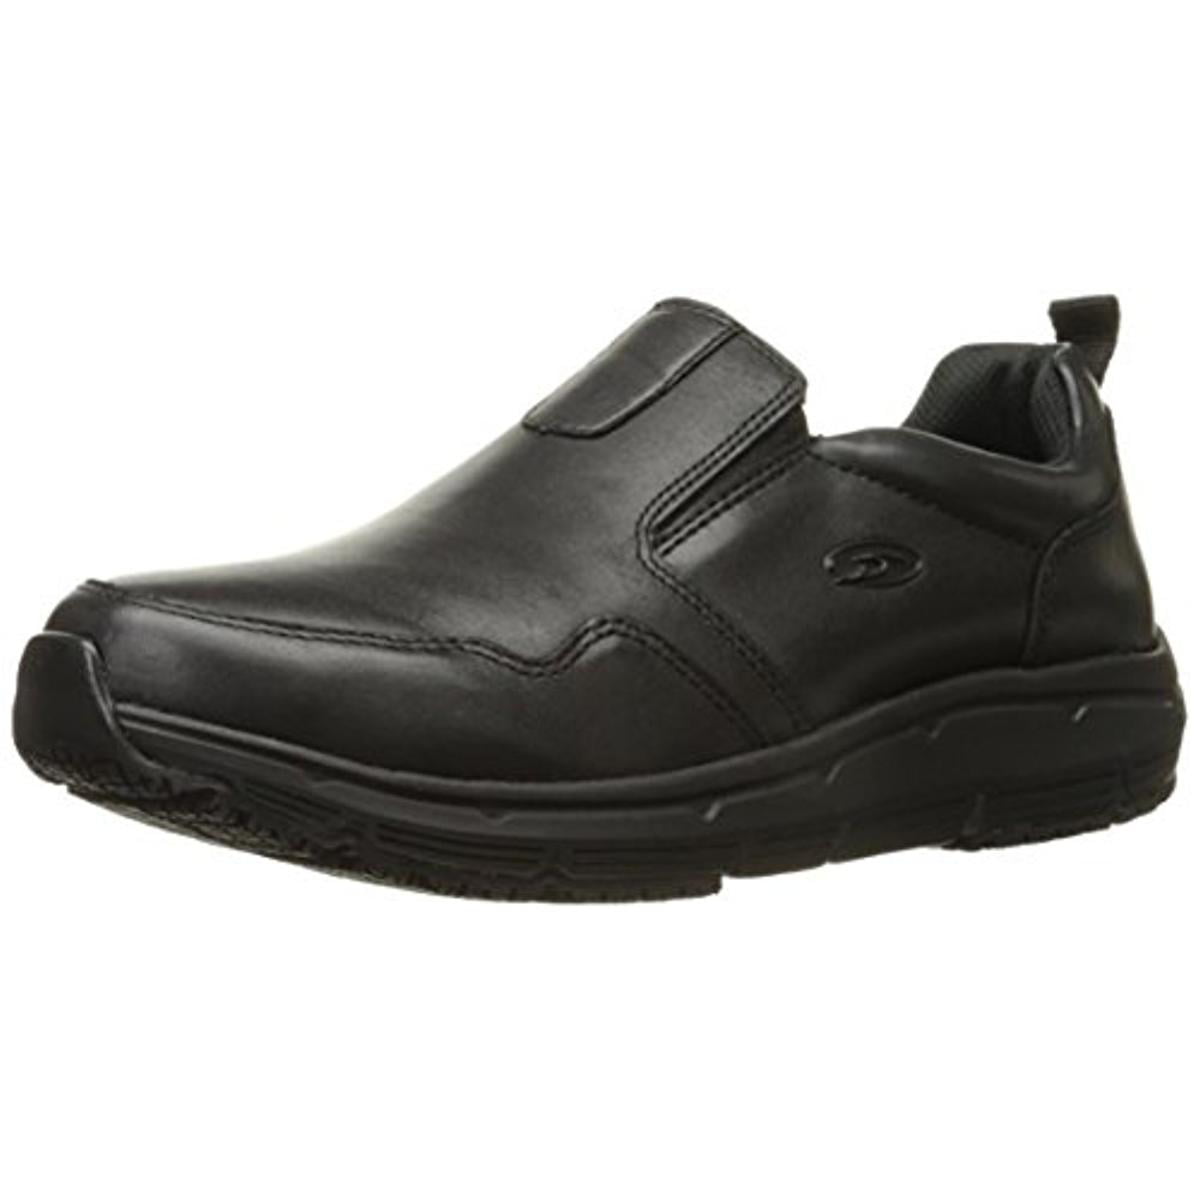 Dr. Scholl's Shoes Dr. Scholl's Mens Beta Leather Slip